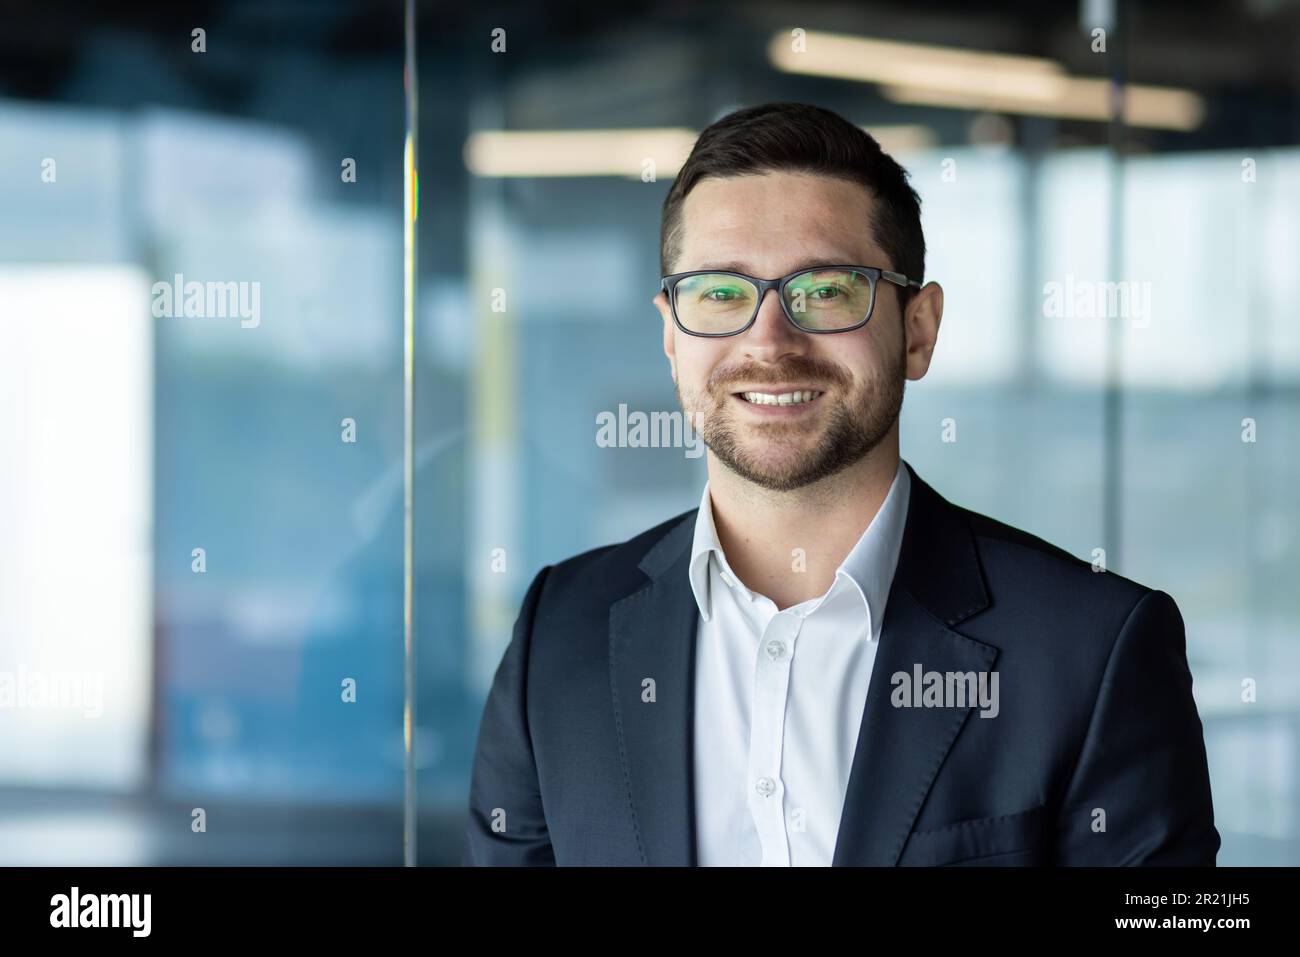 Close-up photo. Portrait of a young businessman, founder, director in a suit and glasses standing in the office and smiling at the camera. Stock Photo